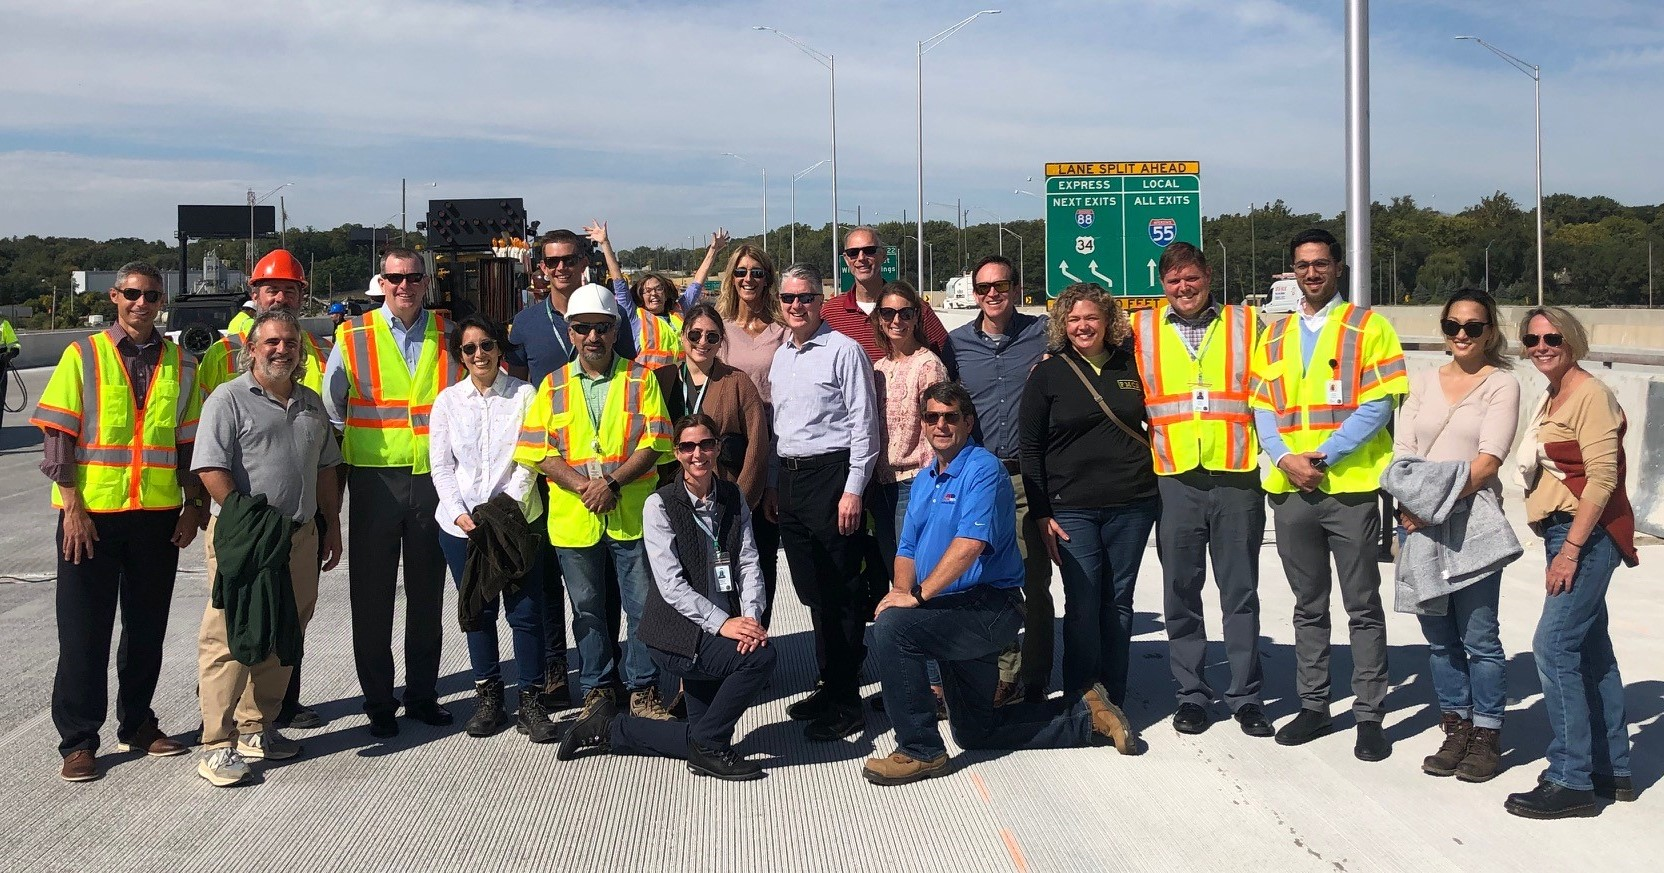 Group of people, several wearing safety vests, posing for a photo on an interstate roadway